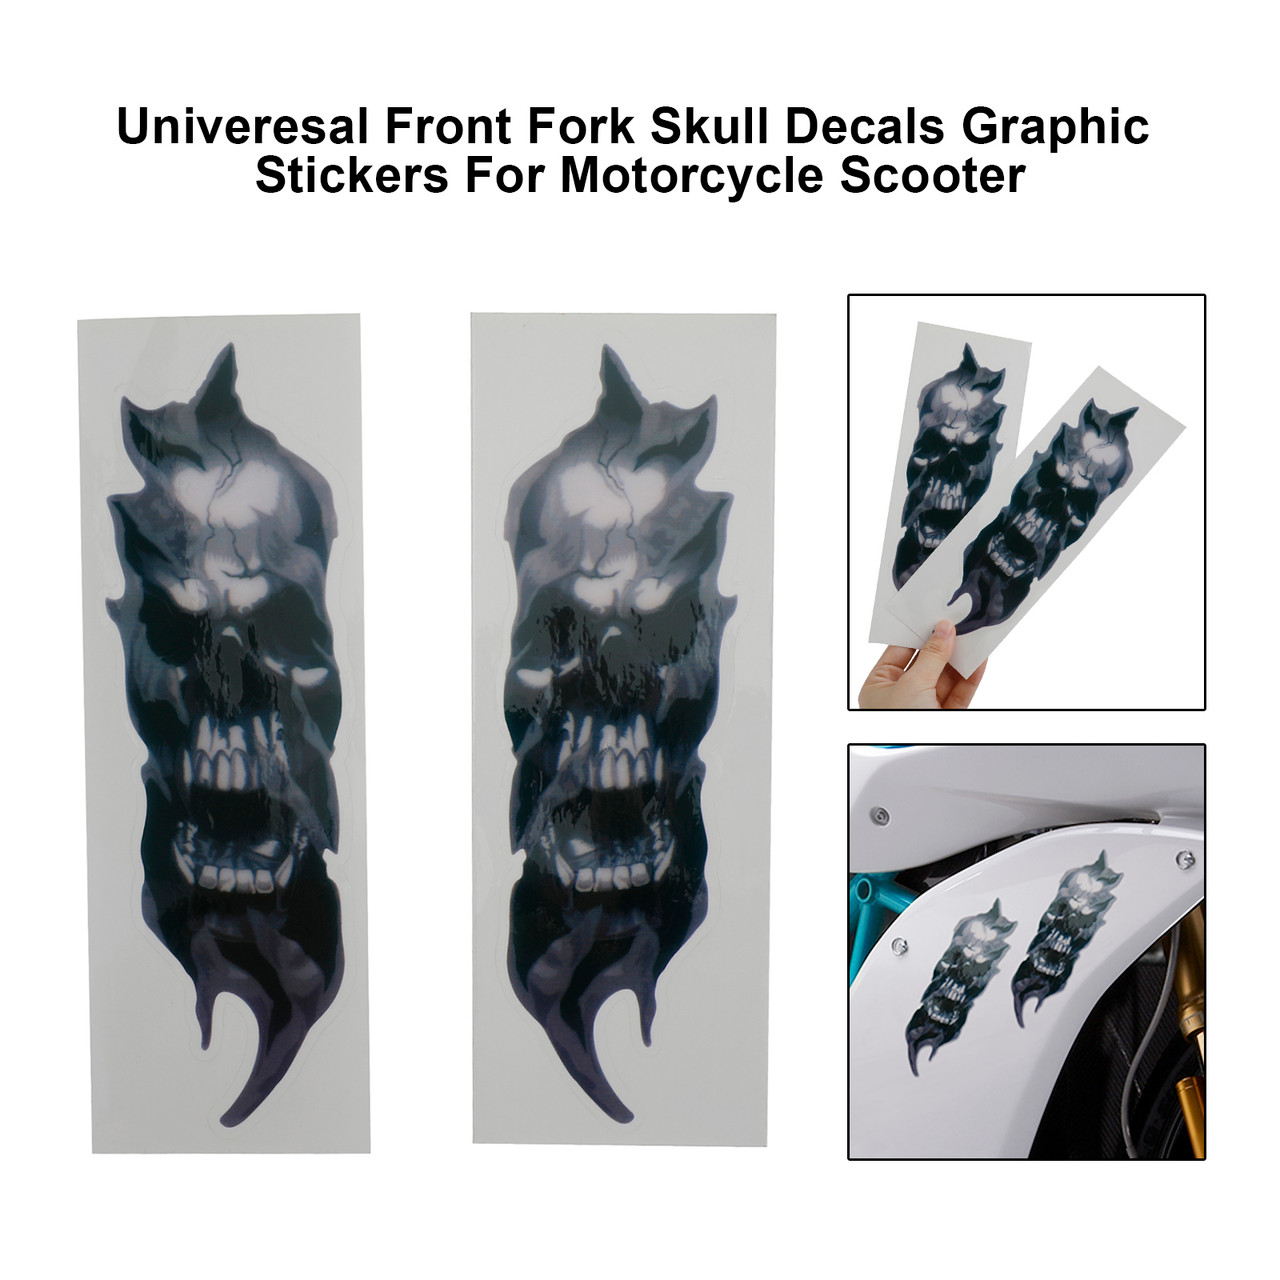 Univeresal Front Fork Skull Decals Graphic Stickers Motorcycle Scooter